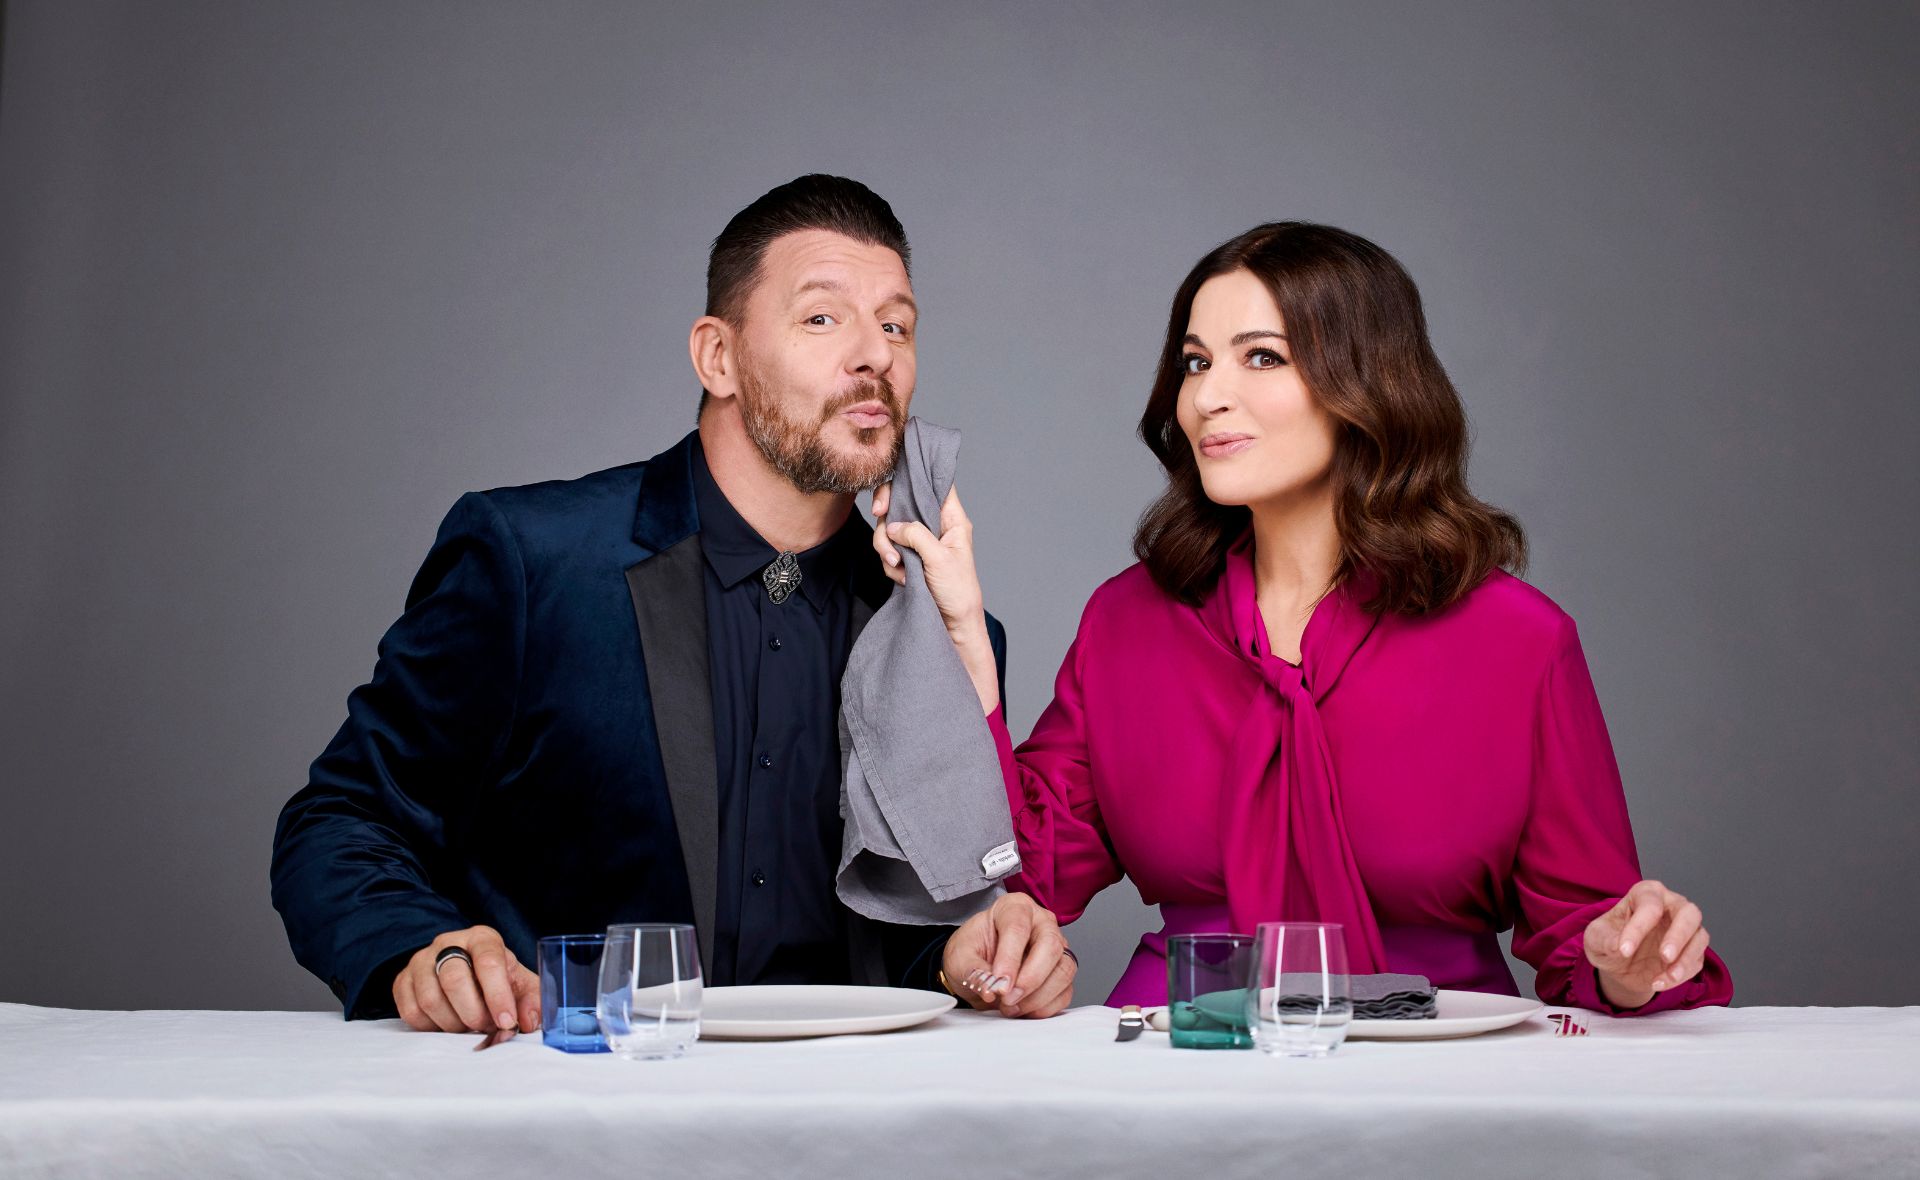 EXCLUSIVE: Manu Feildel dishes on MKR’s “fresh start” as Nigella Lawson replaces Pete Evans as his co-host